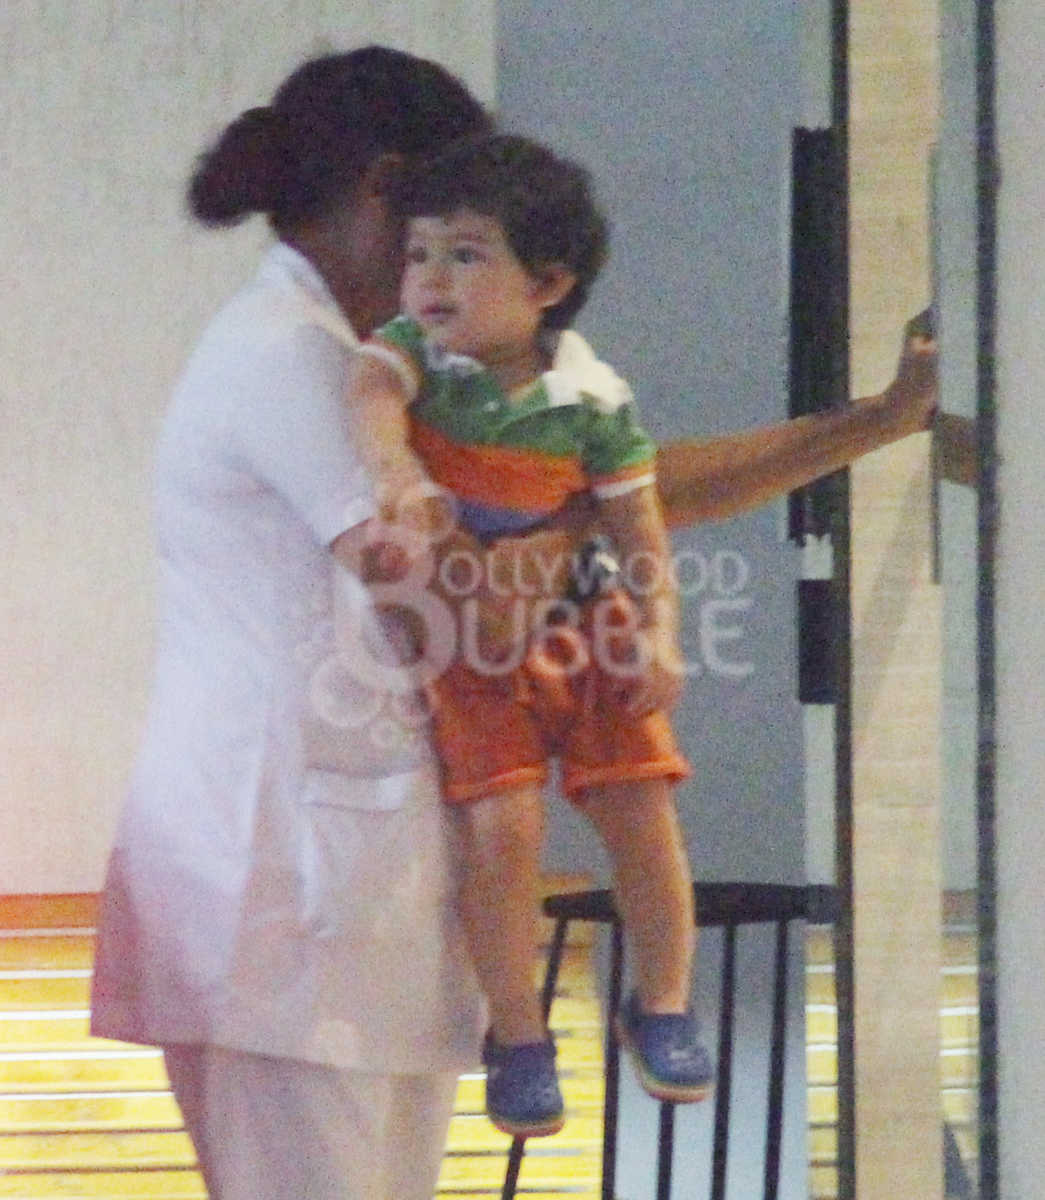 taimur spotted 9 august